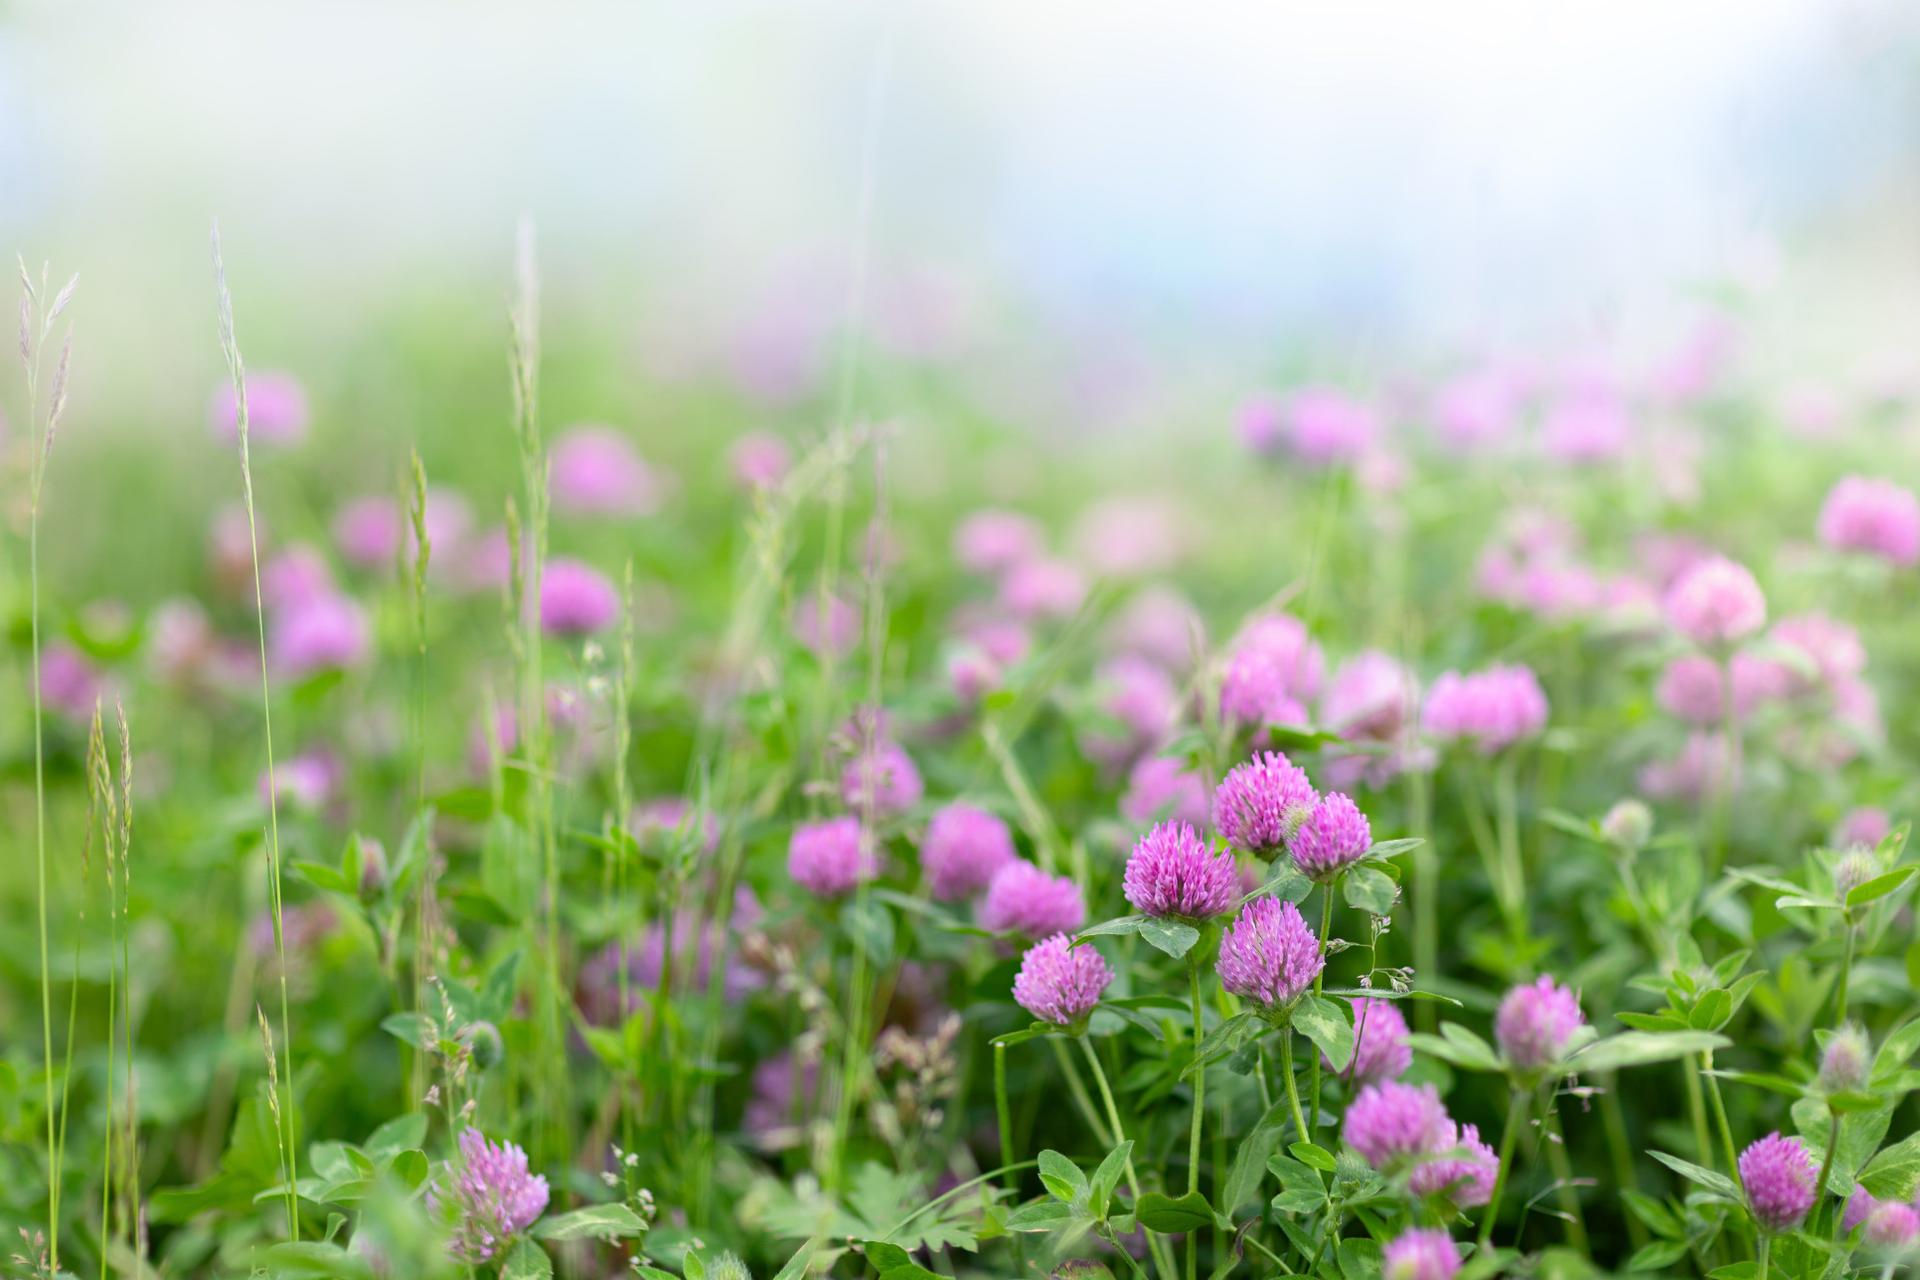 Growing Clover with Flowers